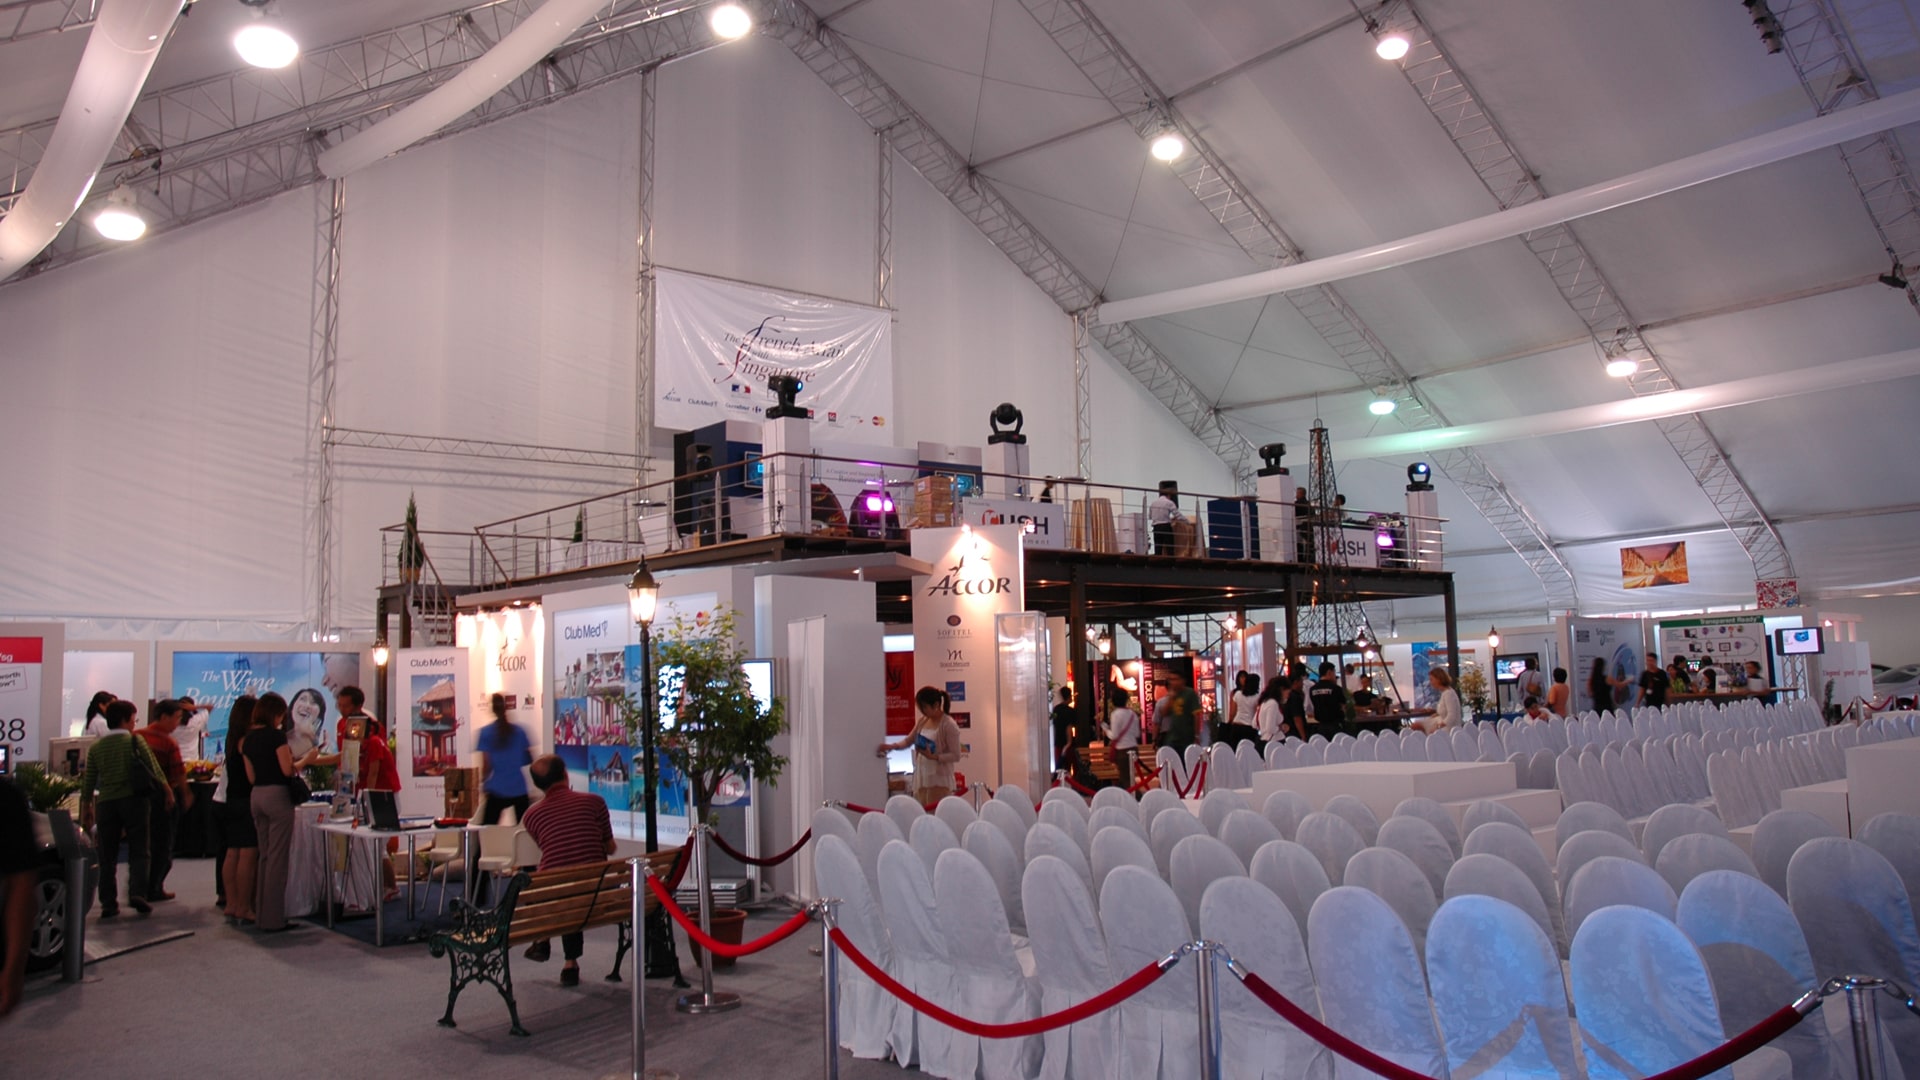 tsc_opt-images_customized-structures_ngee-ann-jewelfest-customized-tent-structure-1920x1080-02-min